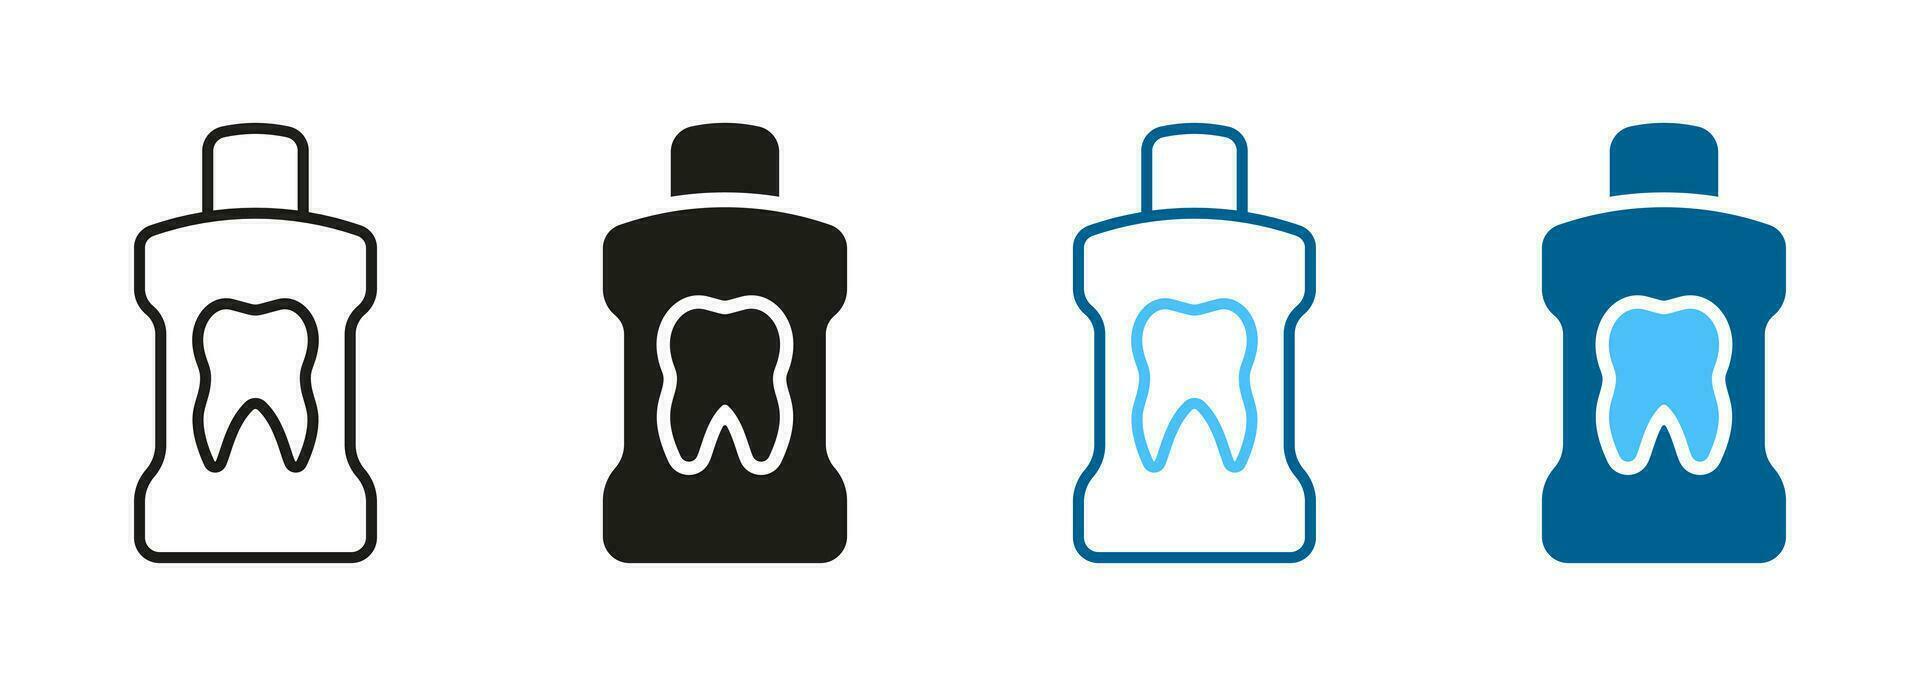 Mouth Wash Bottle for Clean and Freshness Symbol. Dentistry Oral Rinse. Mouthwash Silhouette and Line Icon Set. Dental Hygiene Black and Color Pictogram. Isolated Vector Illustration.